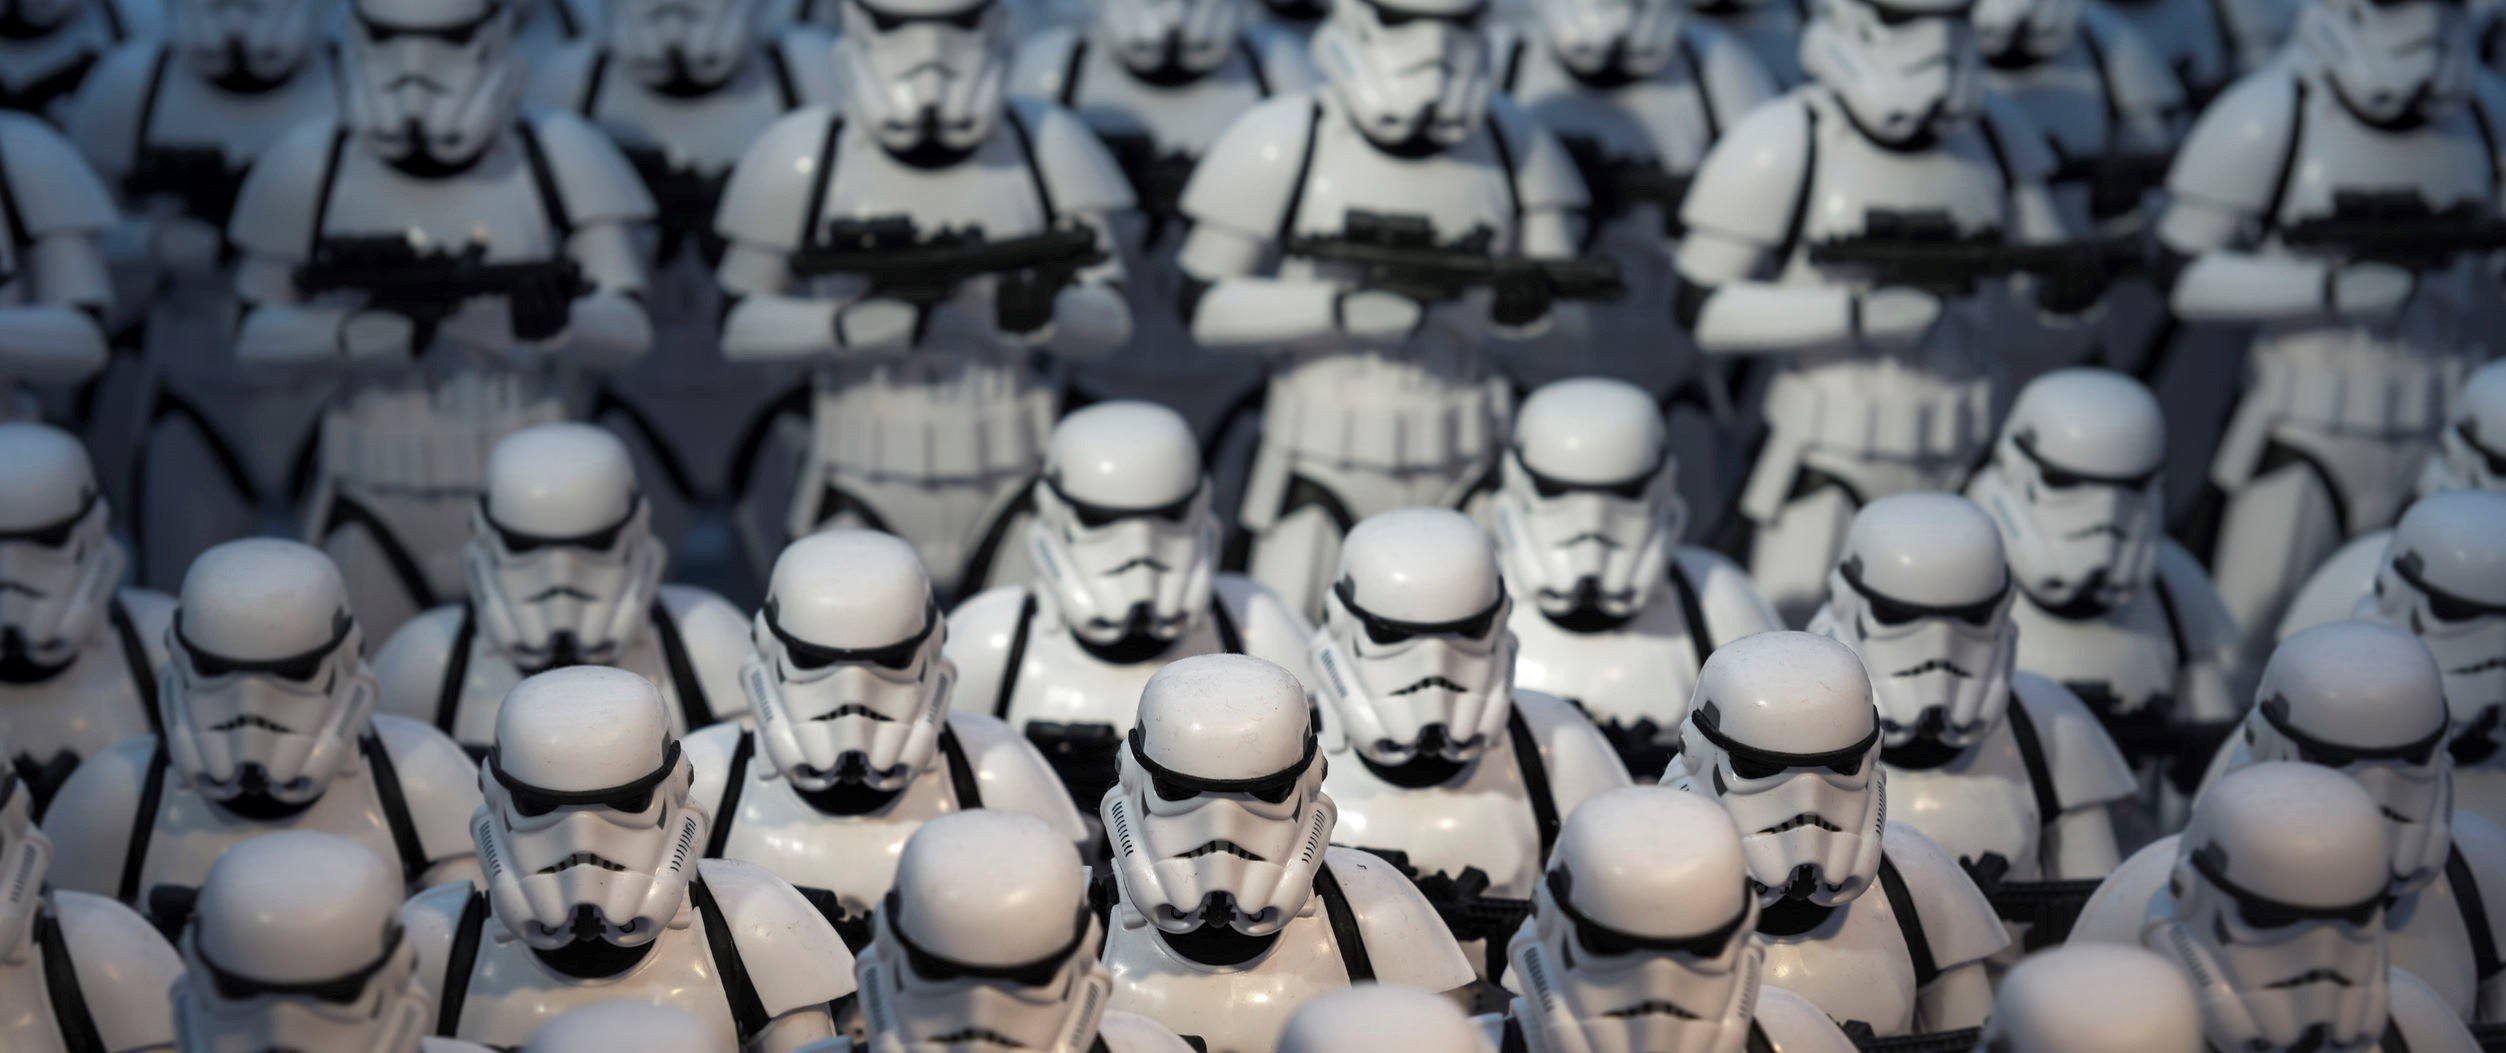 A picture of a crowd of Stormtroopers, who could probably use some extra space.